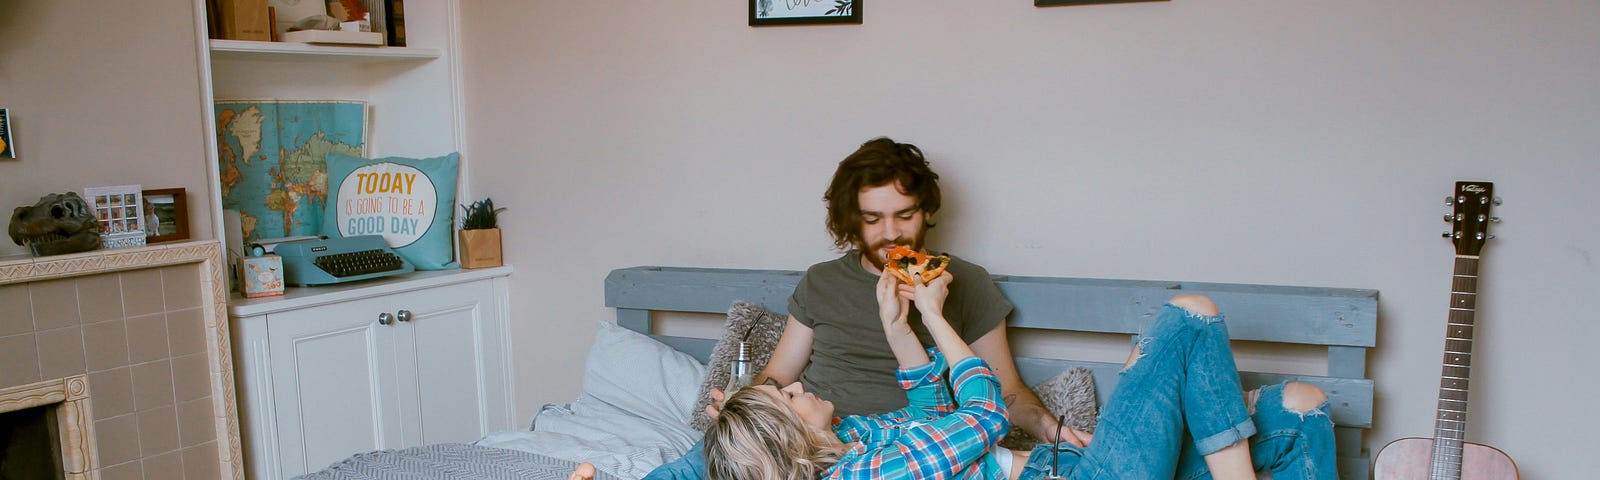 Image of a couple lazing in bed